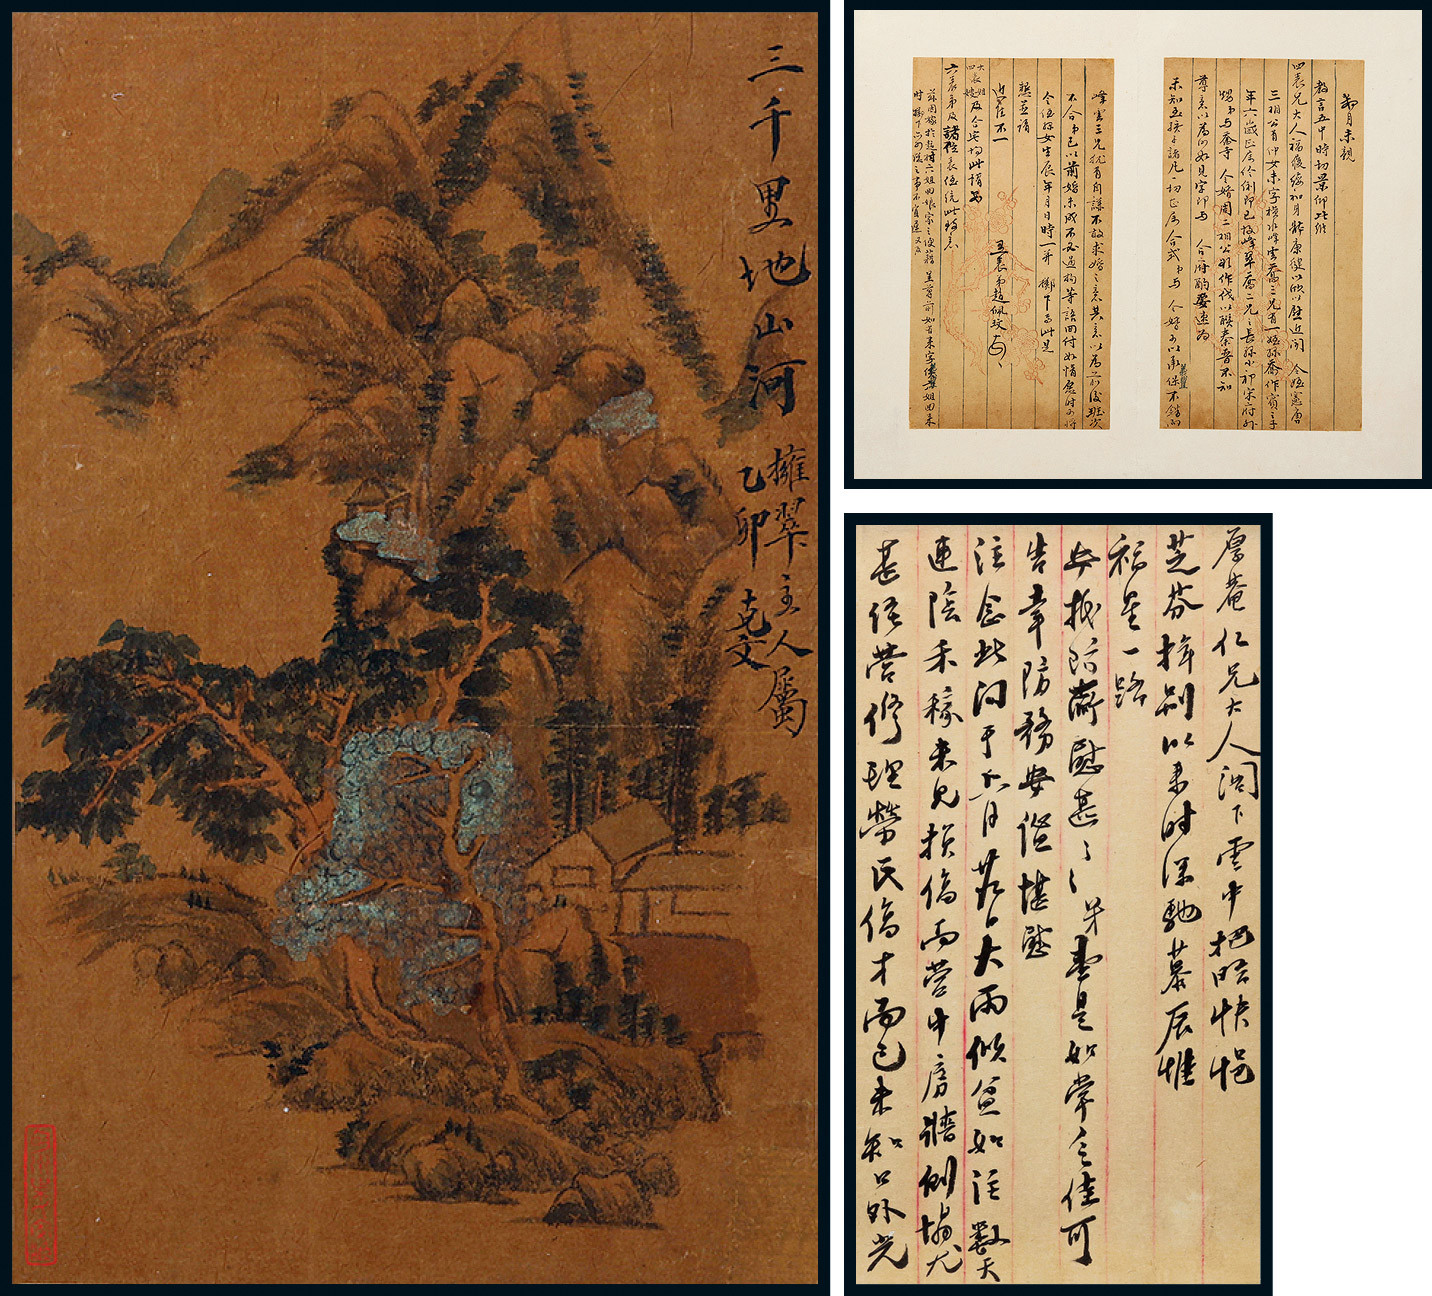 Miniature paintings drawn by Yuan Kewen and letters from Zhao Peiwen, etc. 4 pages in total